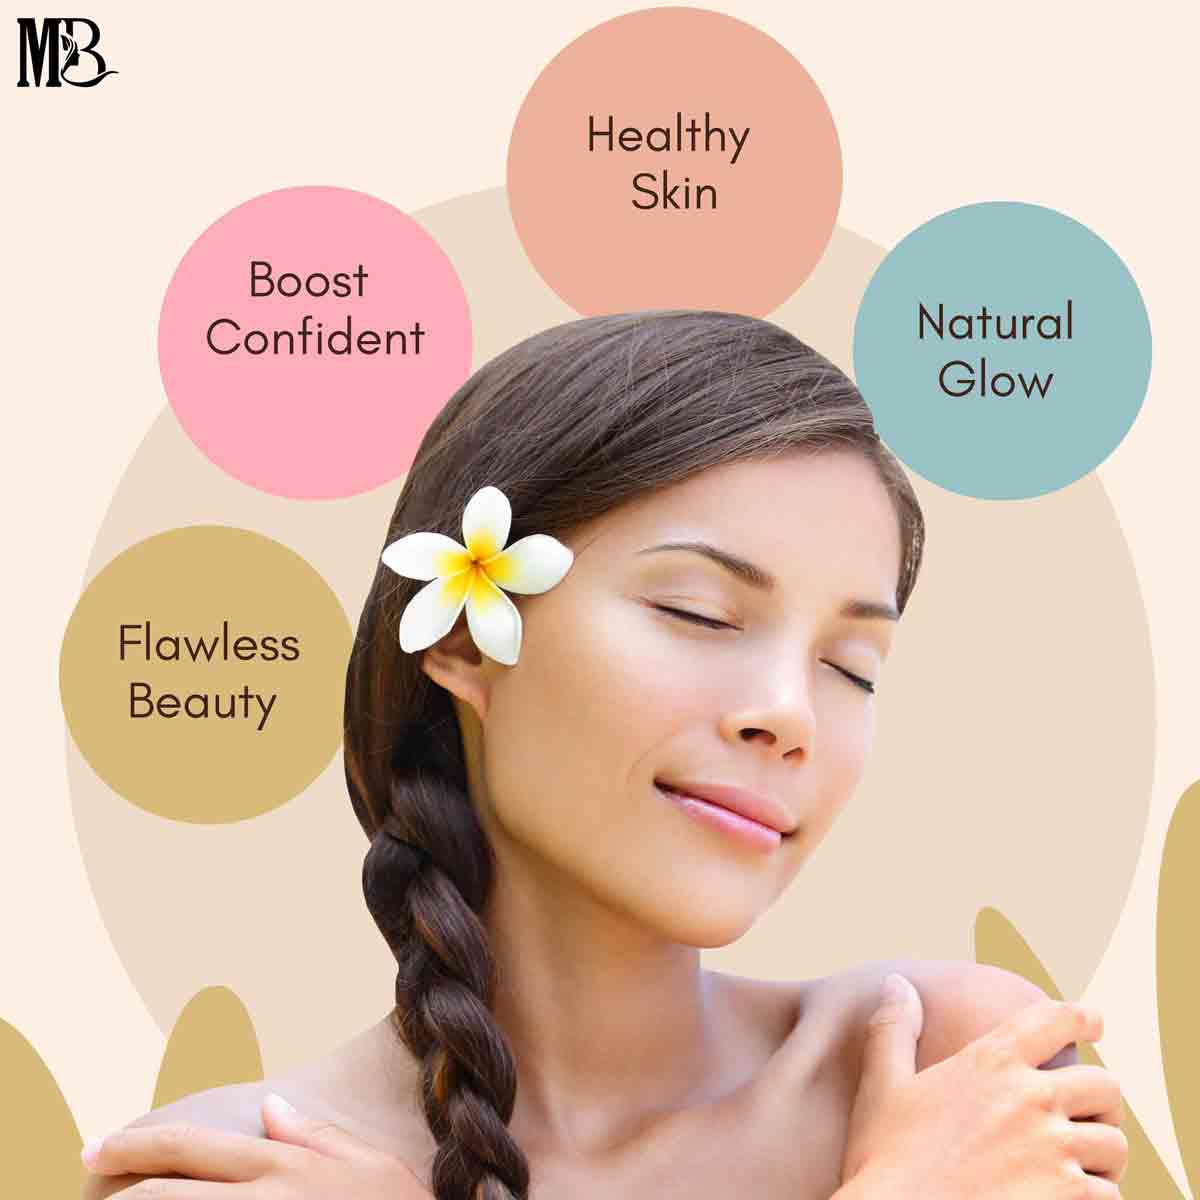 Image of a content woman with a frangipani flower in her hair, illustrating the benefits of skincare: Healthy Skin, Natural Glow, Boosted Confidence, and Flawless Beauty.